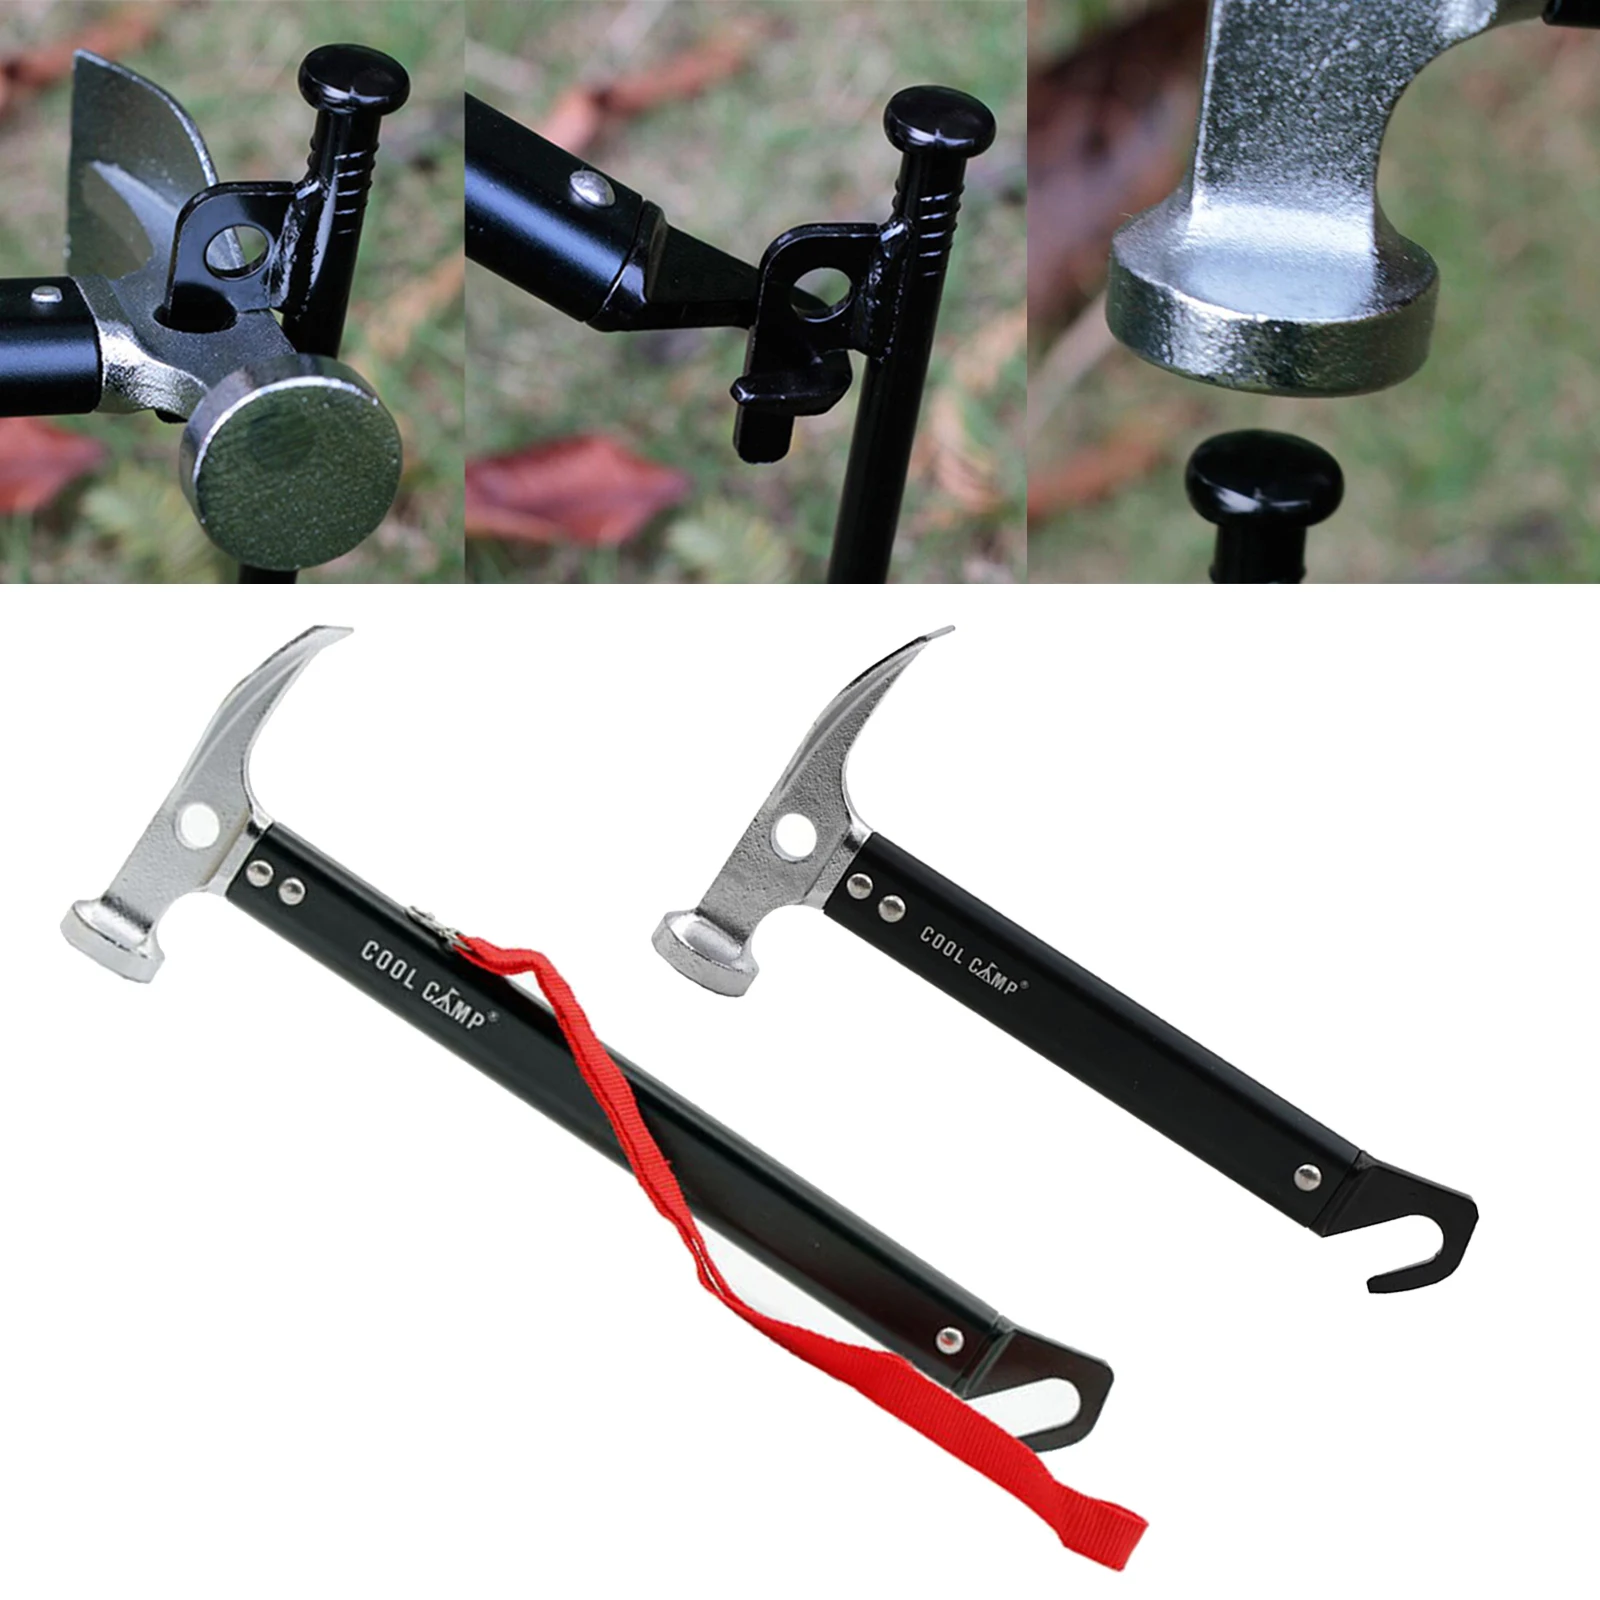 2 in 1 Tent Mallet Peg Puller Hammer Aluminum Alloy Camping Accessories